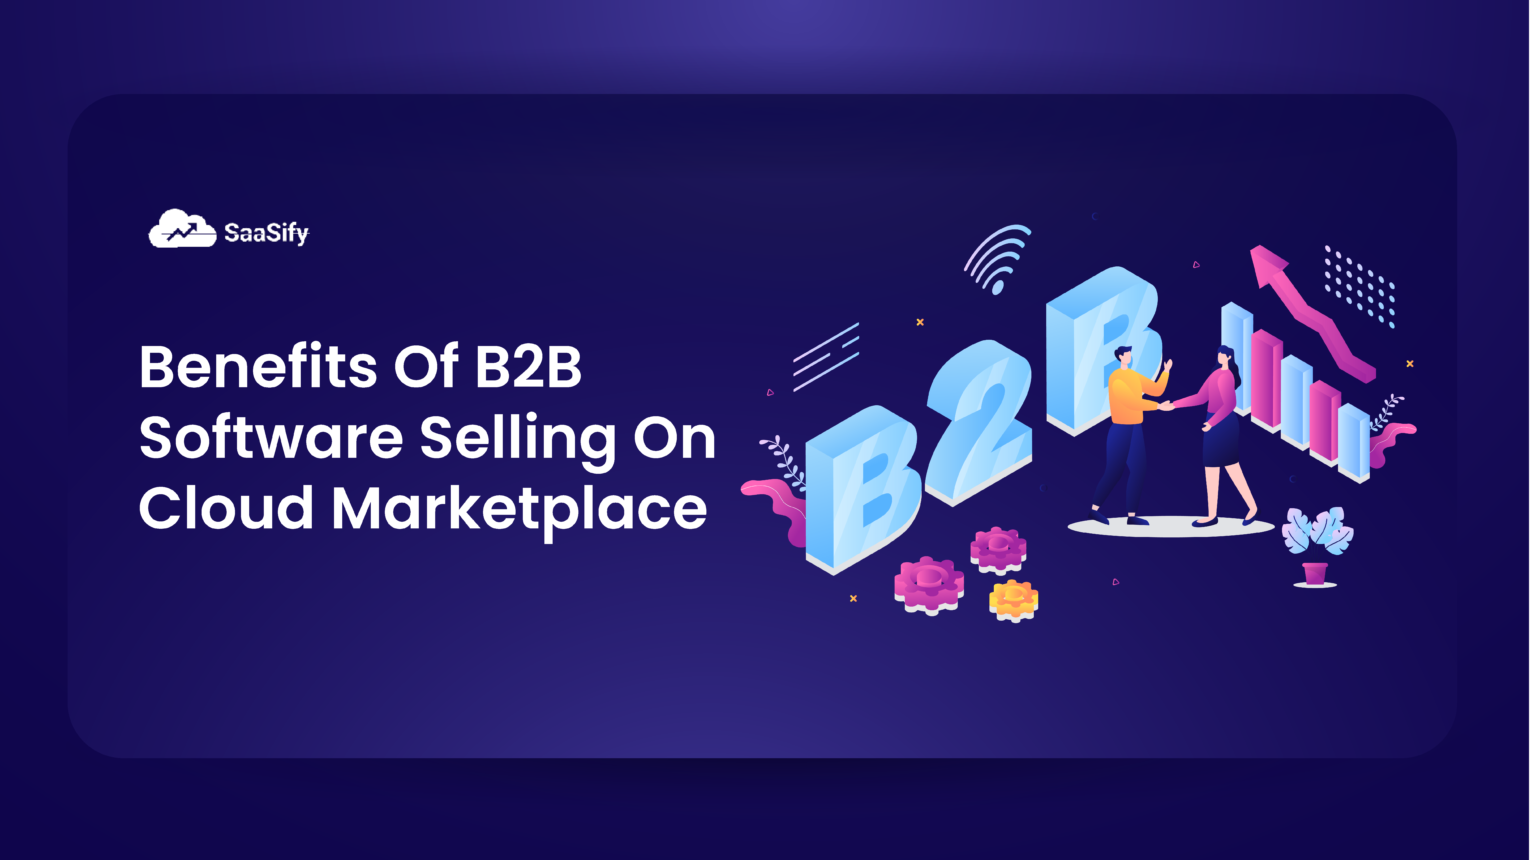 B2B software selling on Cloud Marketplace